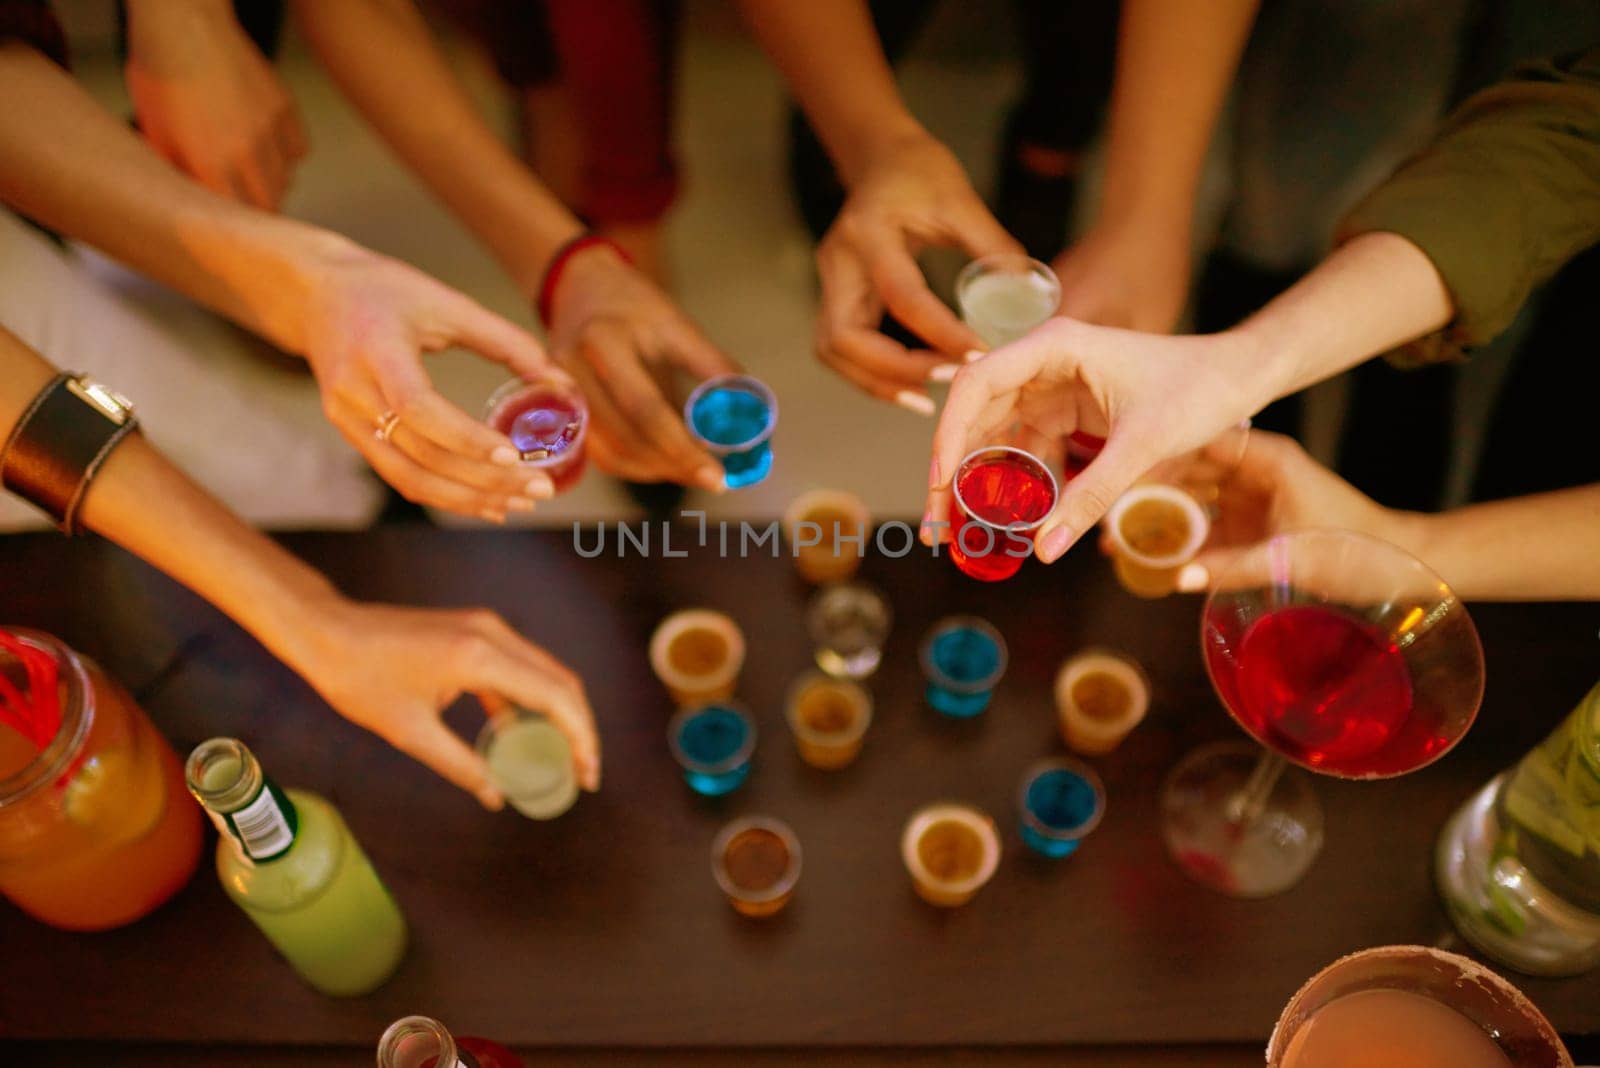 Party, glass and hands of people with alcohol shots at event for toast, celebration or bonding together. Cheers, cocktail beverage and friends group for happy hour, social gathering or entertainment.